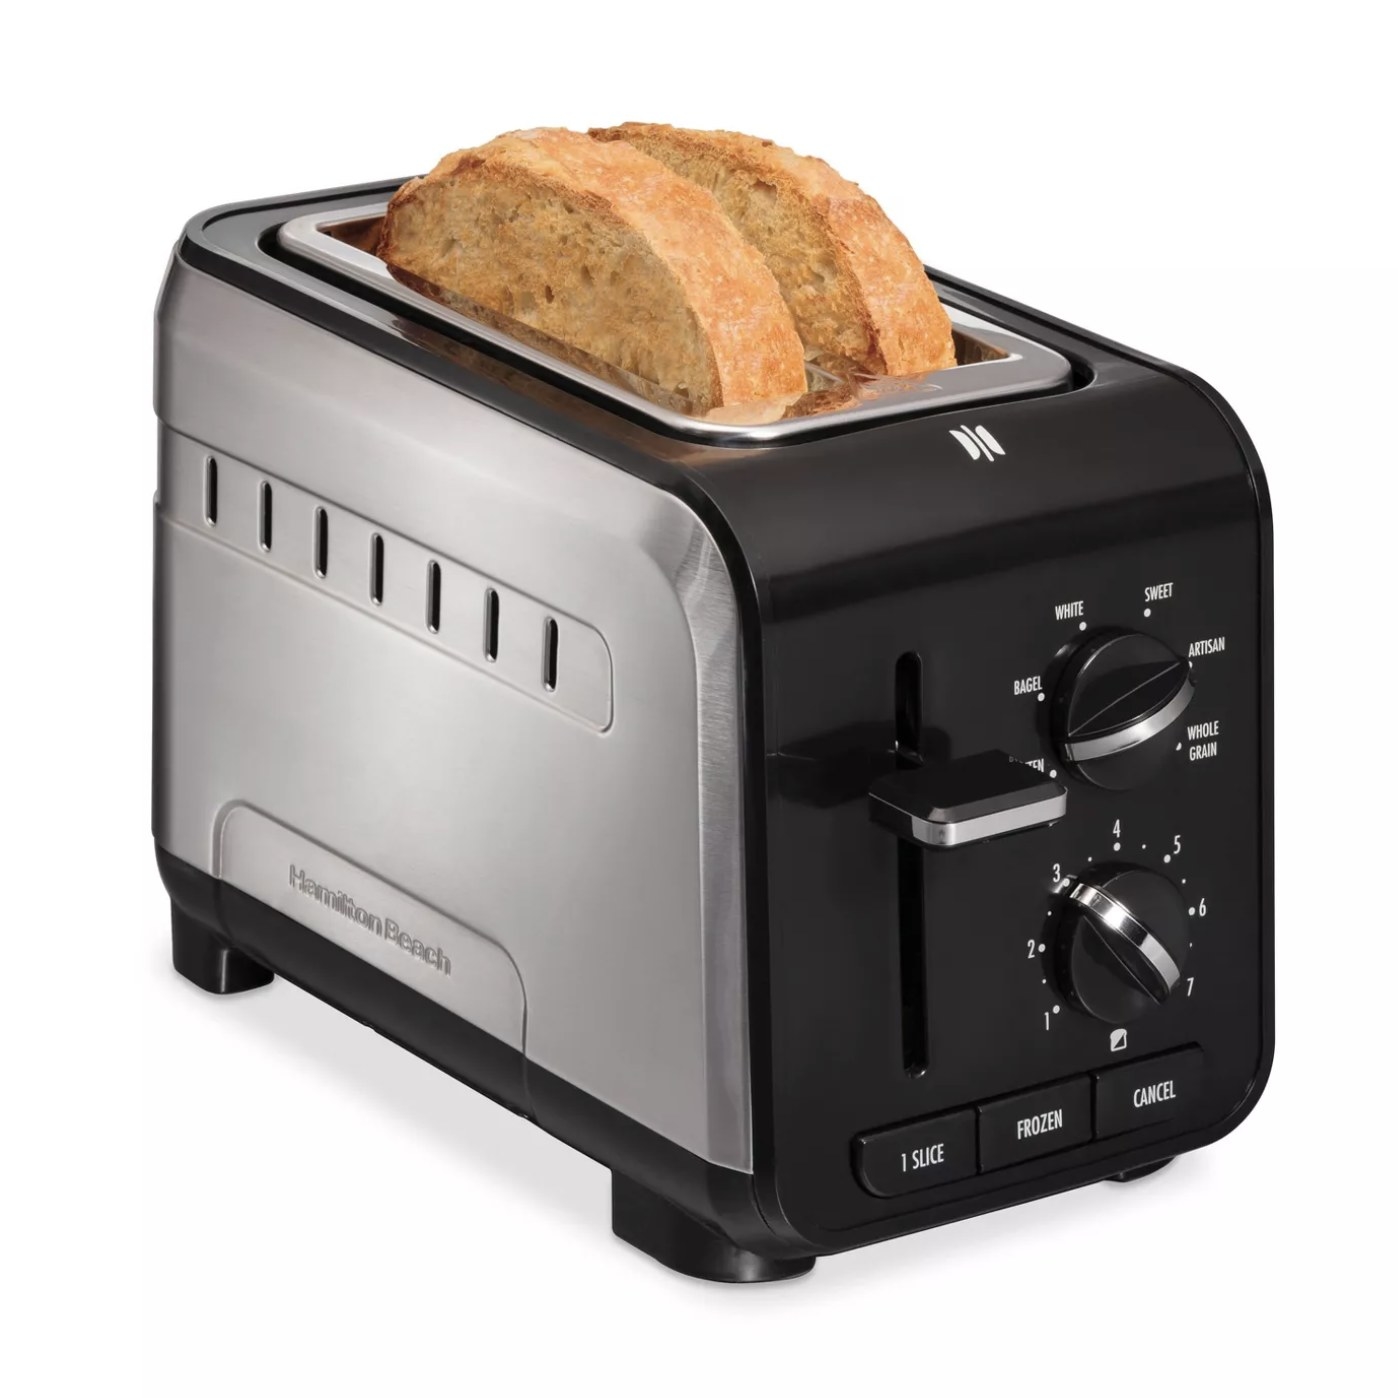 The toaster